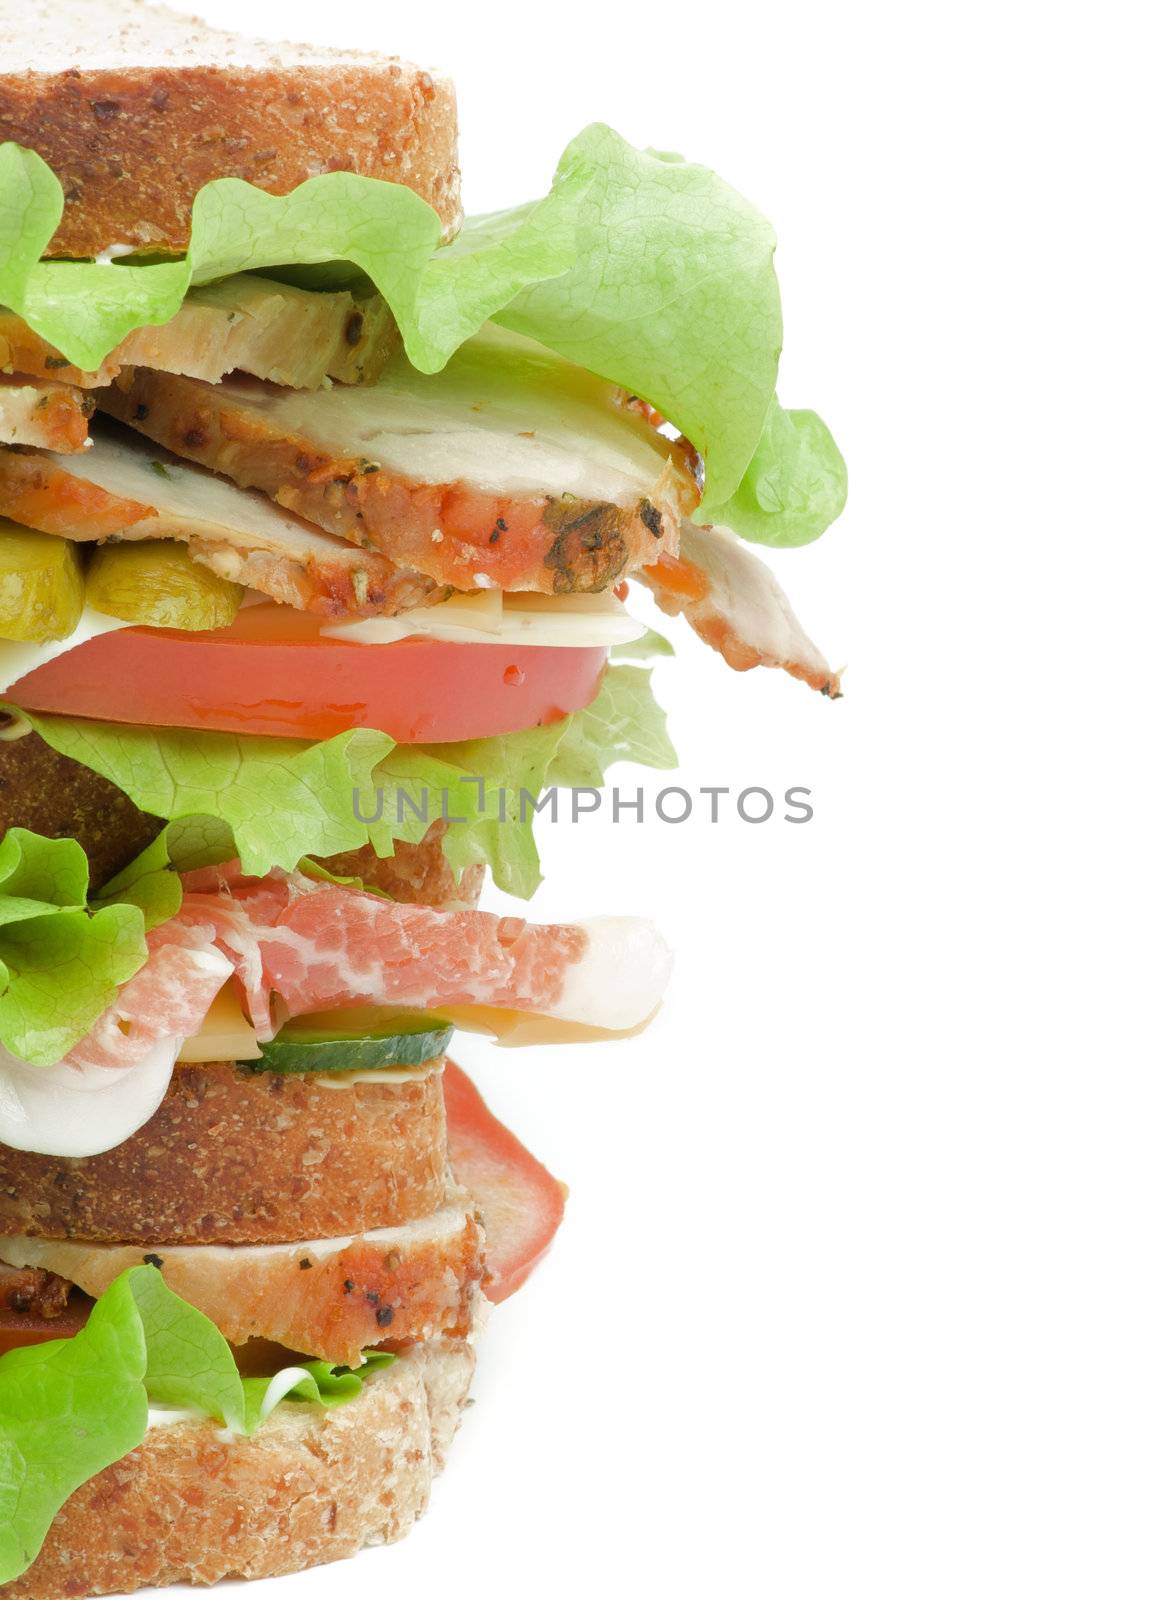 Tasty Turkey Meat Sandwich with  Cheese, Tomato, Bacon, Marinated  Gherkins and Lettuce on Whole Wheat Bread isolated on white background